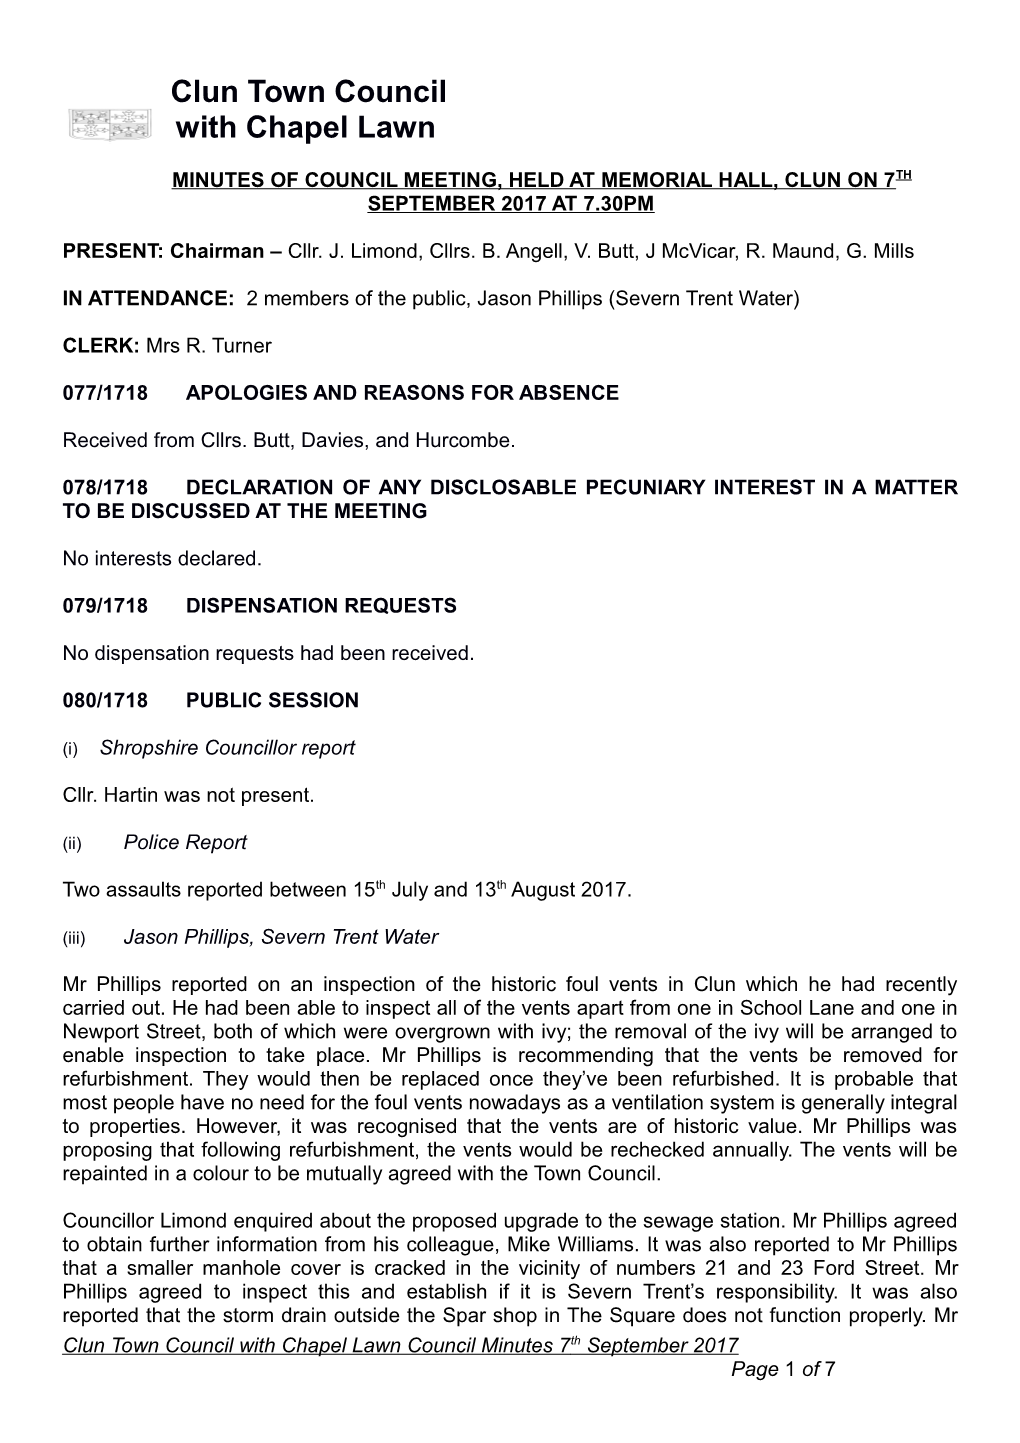 Minutes of Council Meeting, Held Atmemorial Hall, Clunon7th September 2017 at 7.30Pm